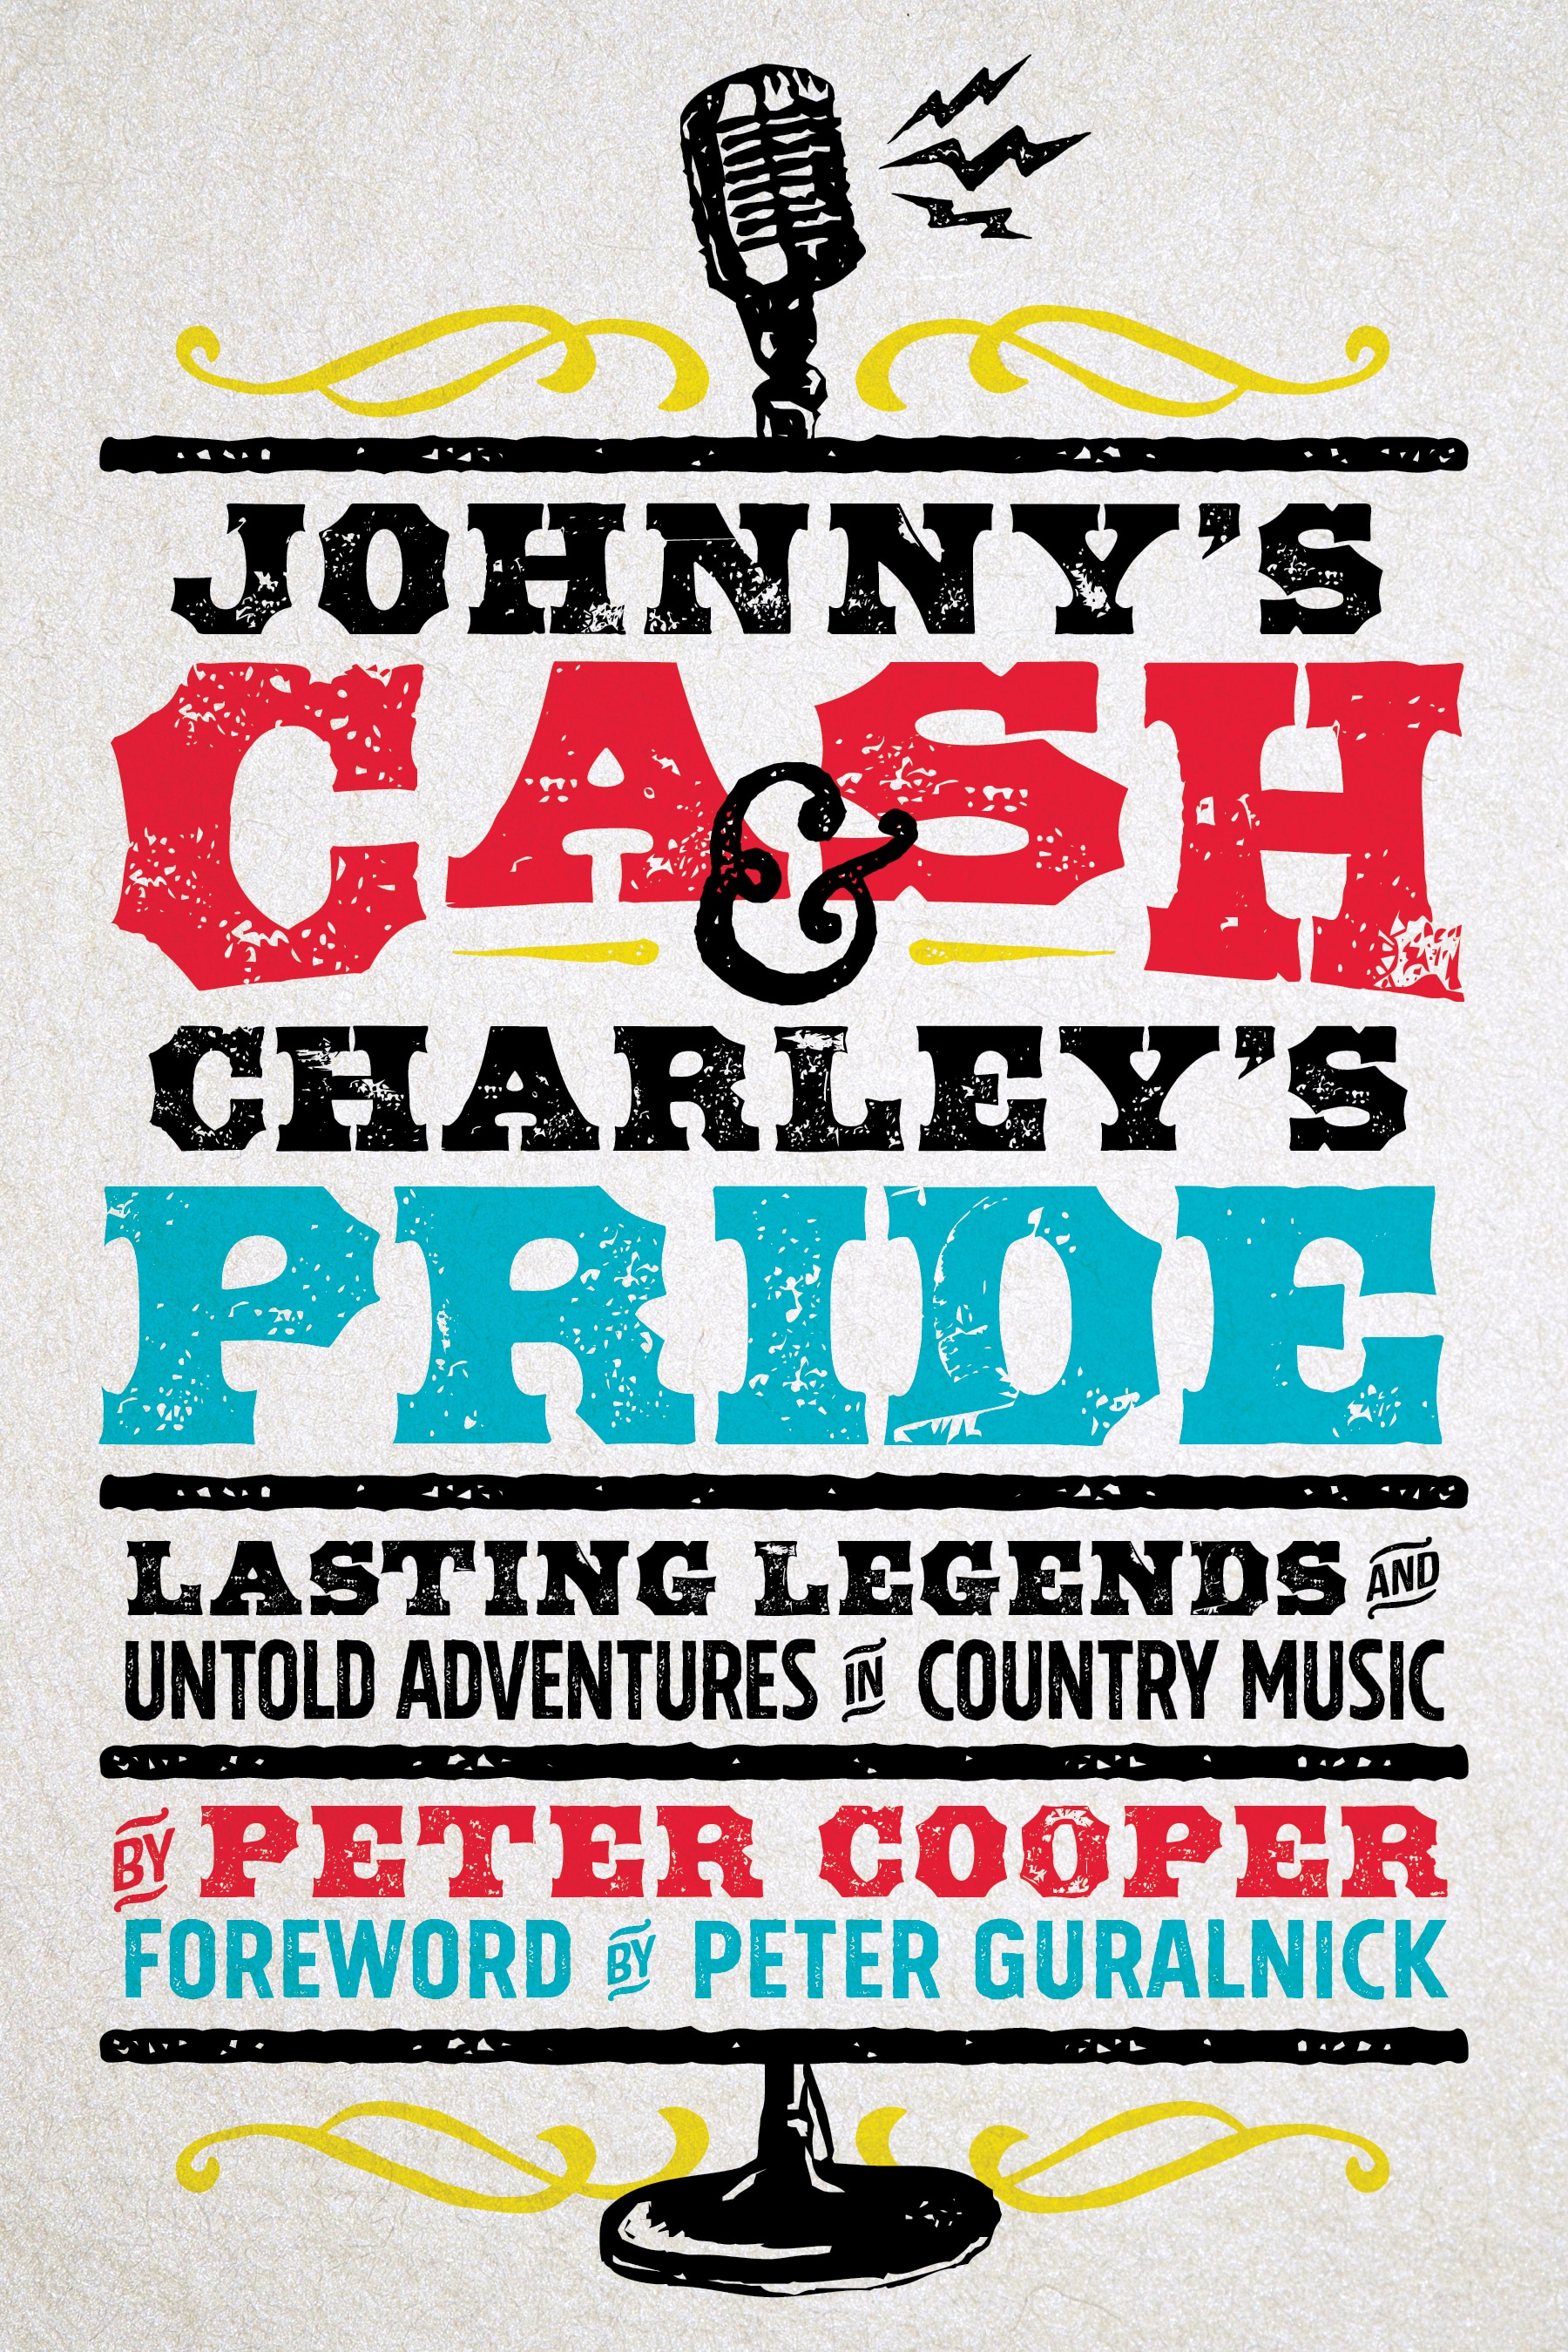 Peter Cooper Sings David Olney’s Praises in Excerpt from His New Book, Johnny’s Cash and Charley’s Pride